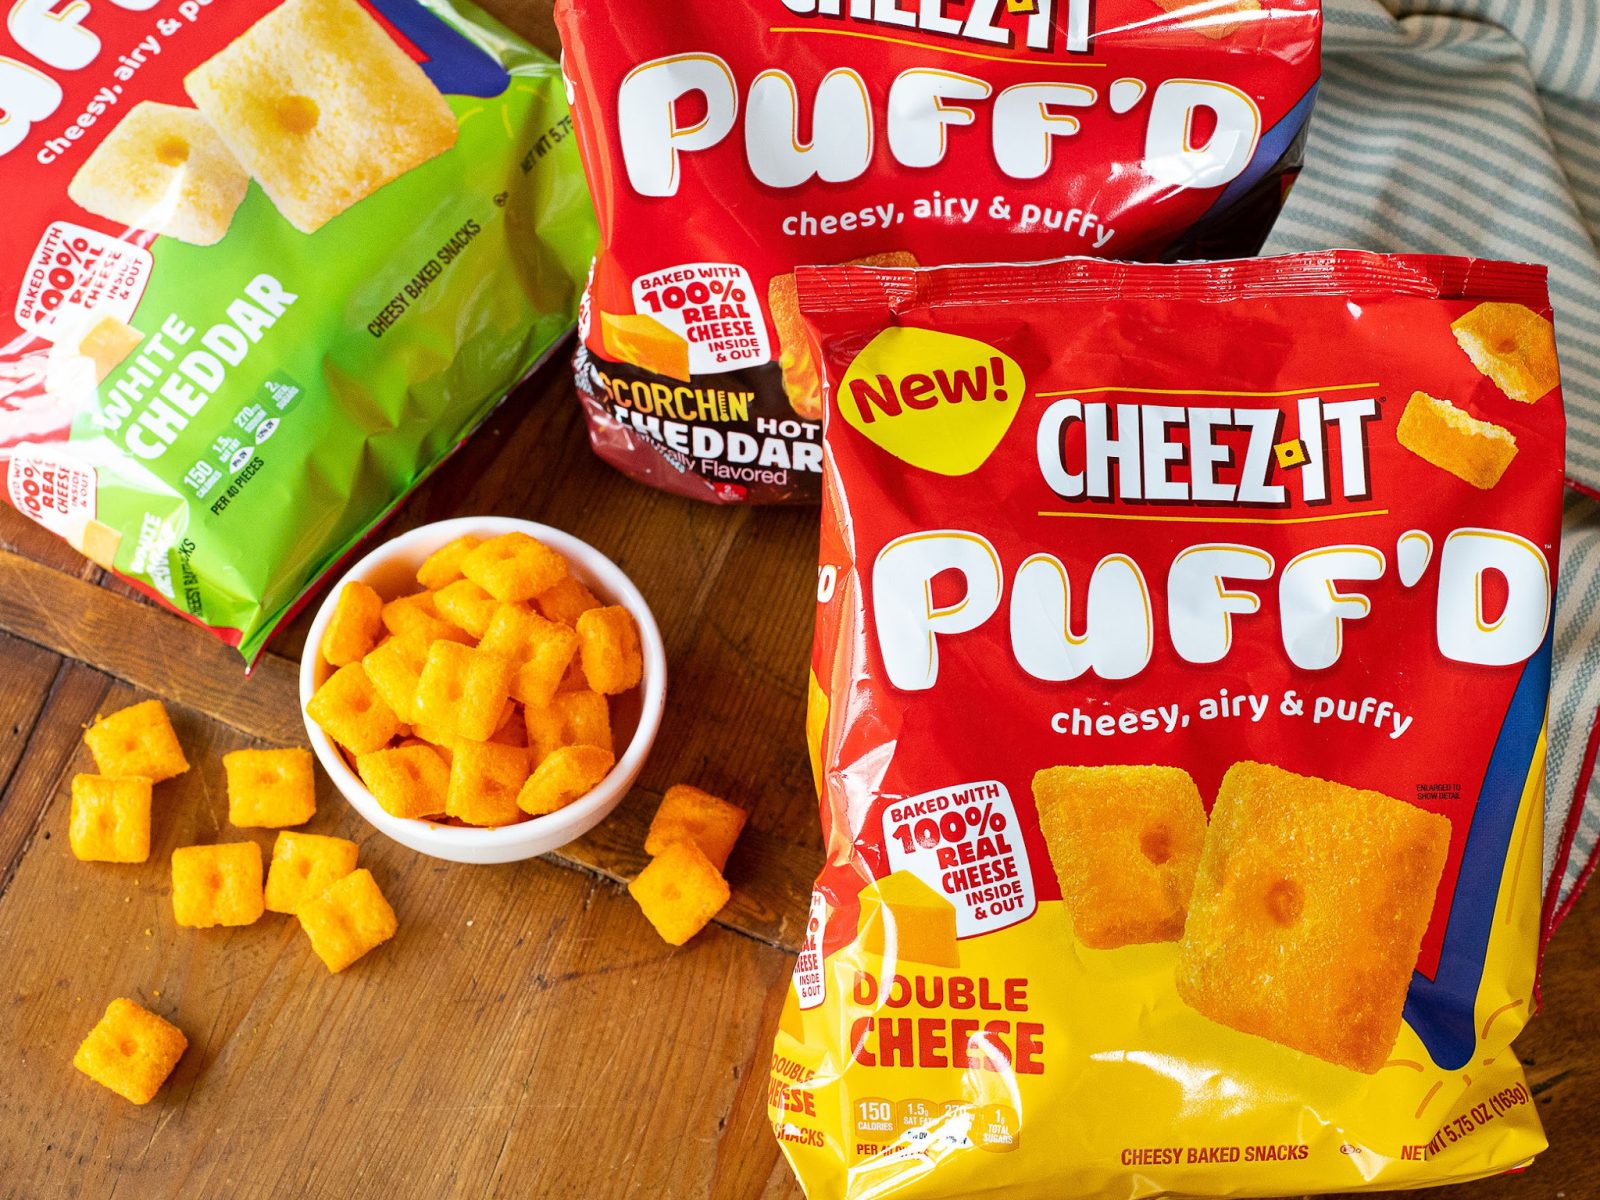 Cheez-It Crackers, Puff’d Snacks, Grooves and As Low As $2.49 At Kroger